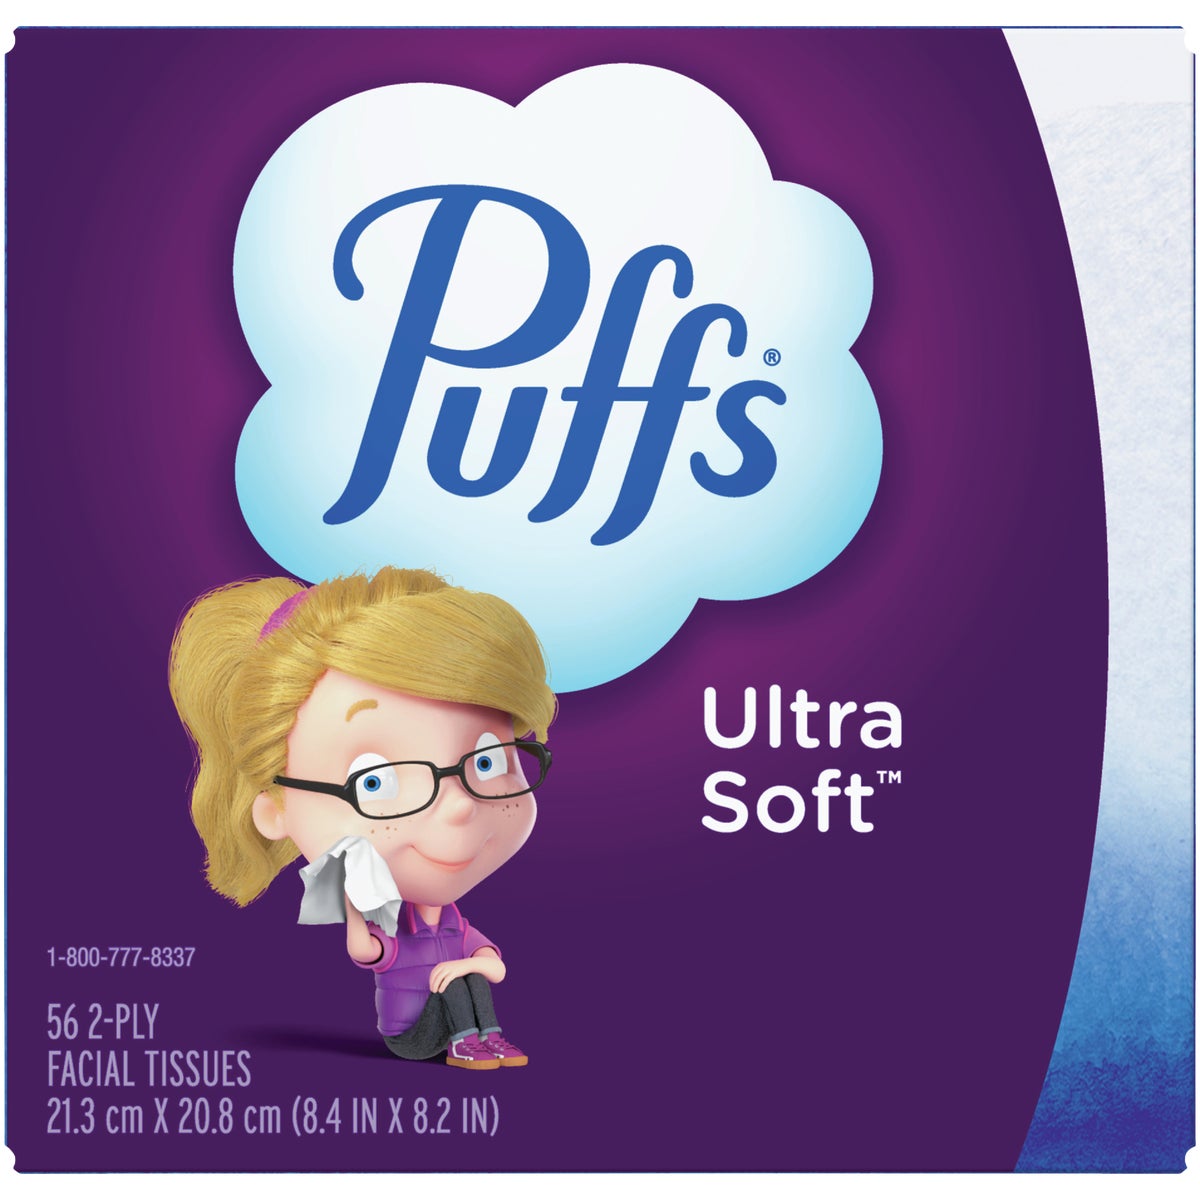 Ultra Soft Puffs 3700035038 Puffs Ultra Soft Non-Lotion Facial Tissue (56-Count) 3700035038 Pack of 24